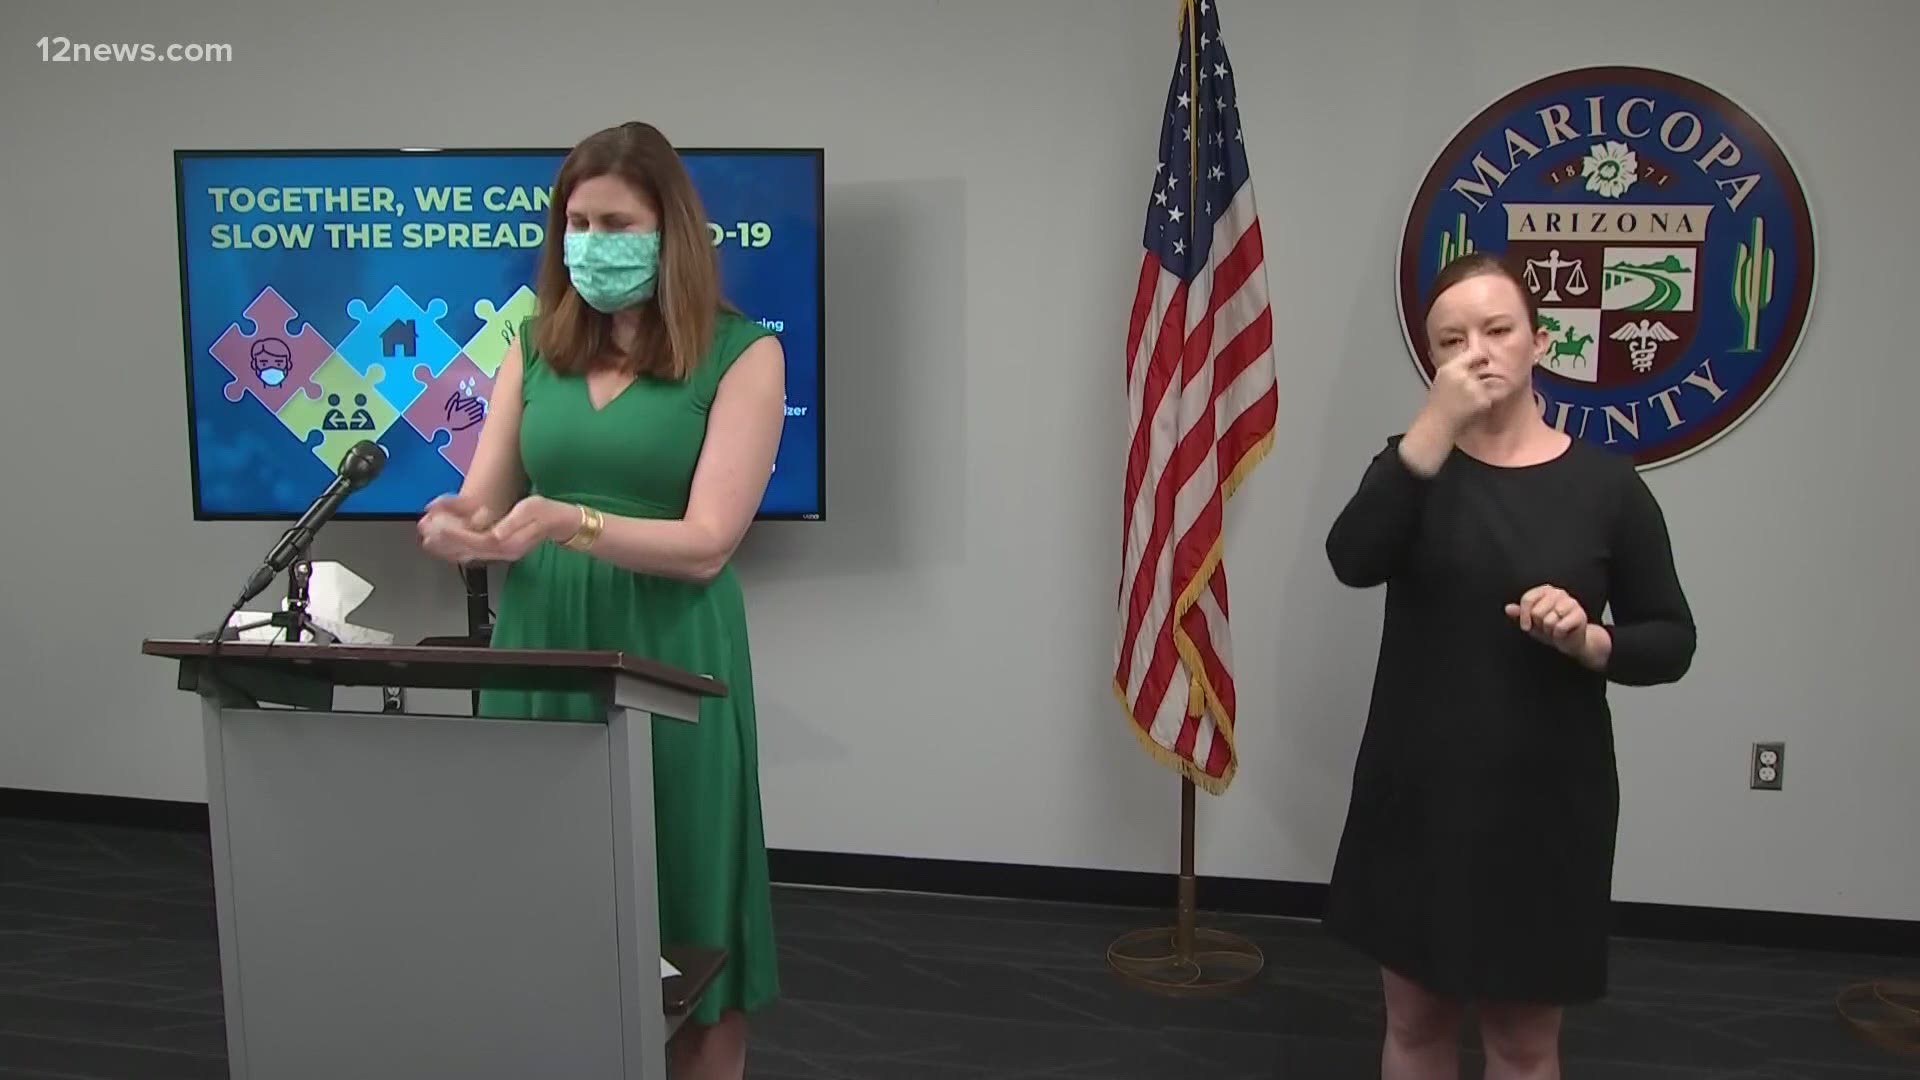 Maricopa County's medical director admits she was wrong about not wearing masks. Now they're requiring all employees to use them when they can't social distance.